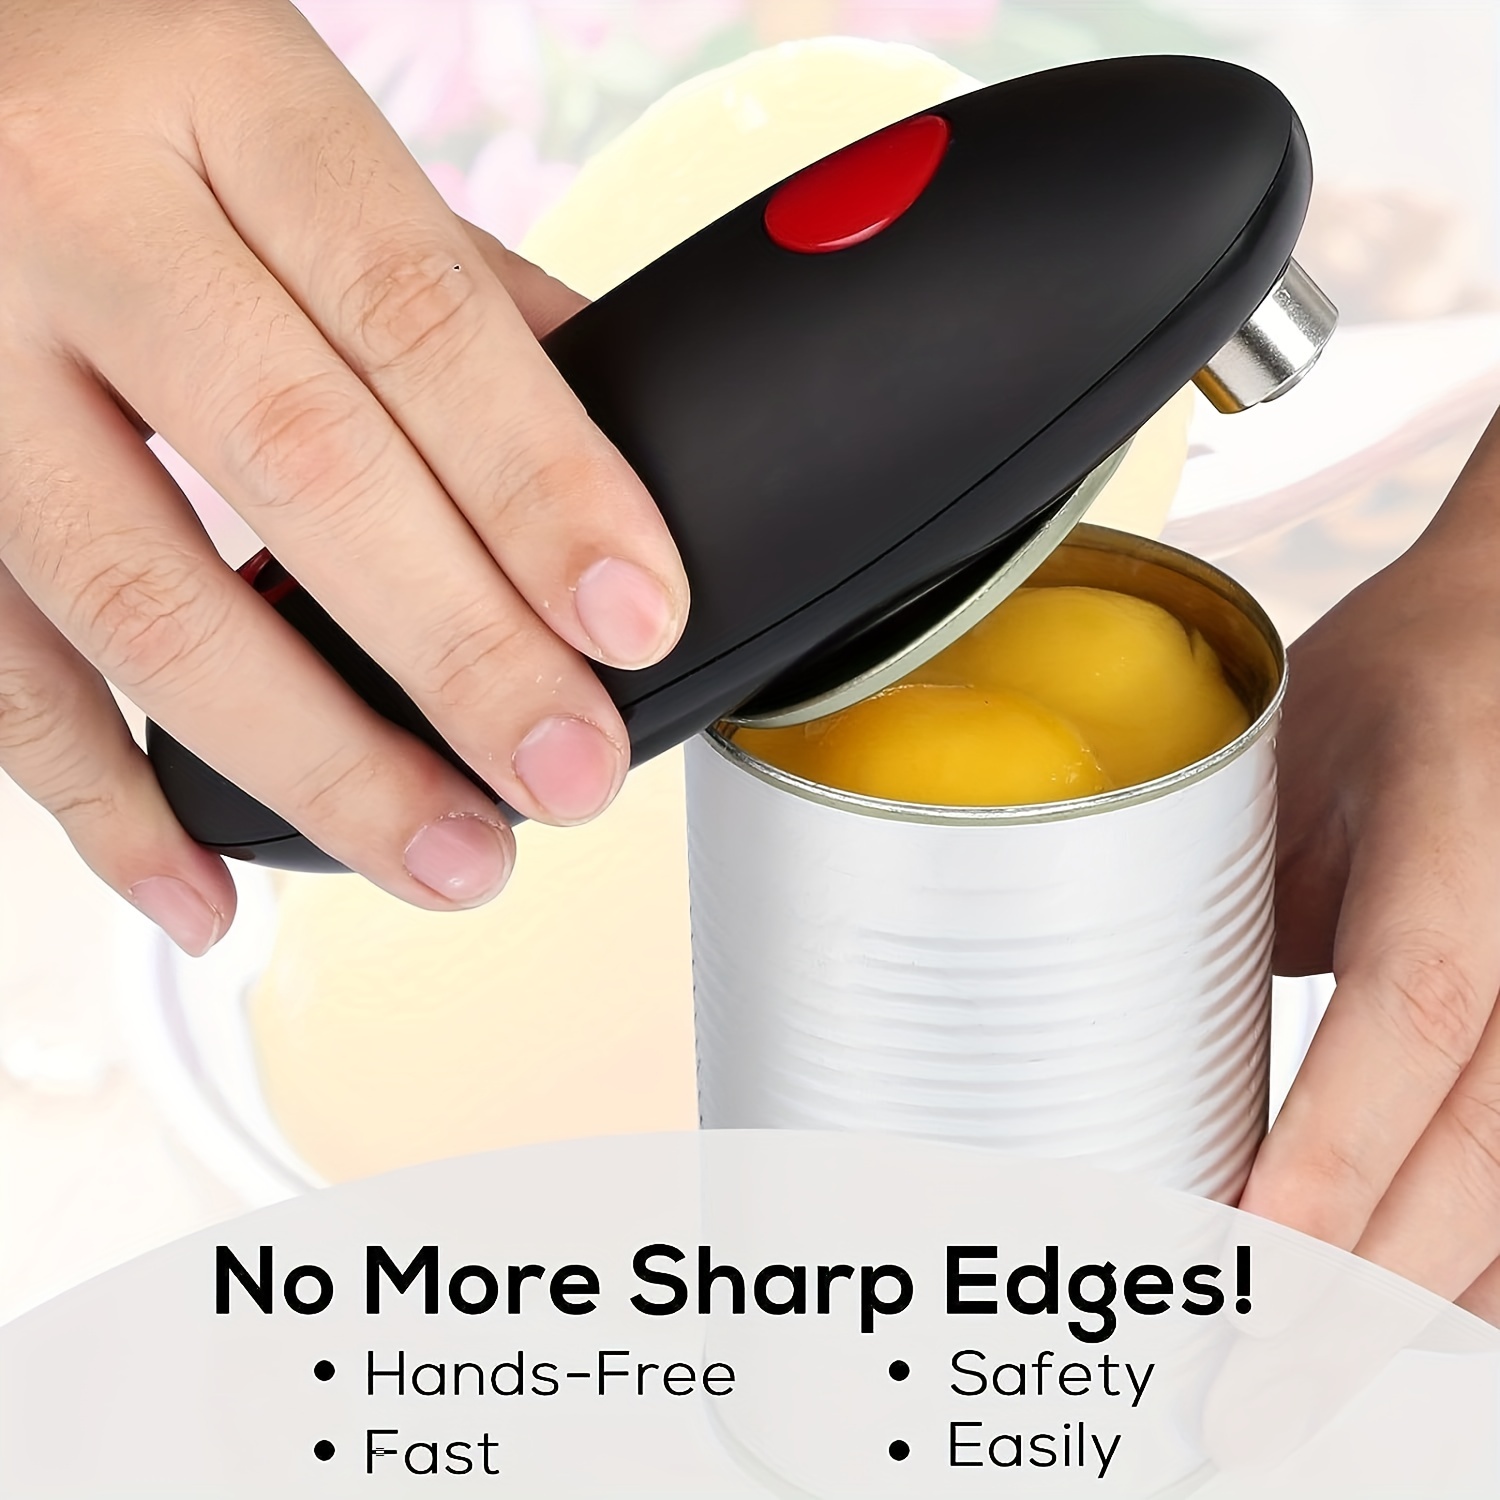 Electric Can Opener, No Sharp Edge Can Opener Electric, Hands-Free Electric Can Opener for Kitchen, Automatic Can Opener for Any size, Kitchen